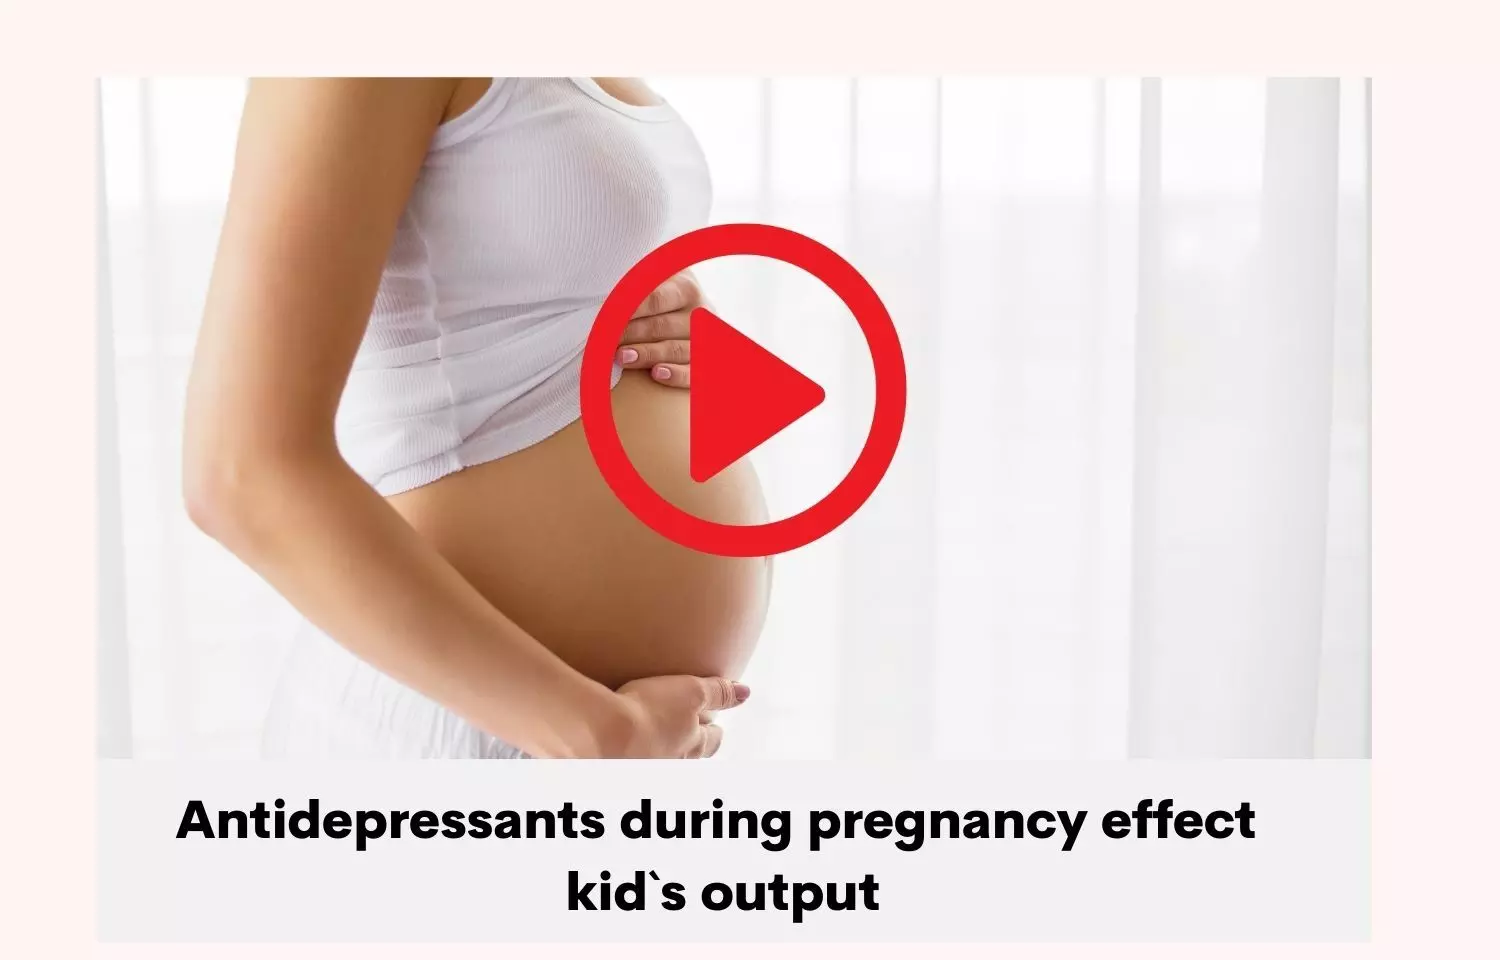 Kids output affected by antidepressants during pregnancy